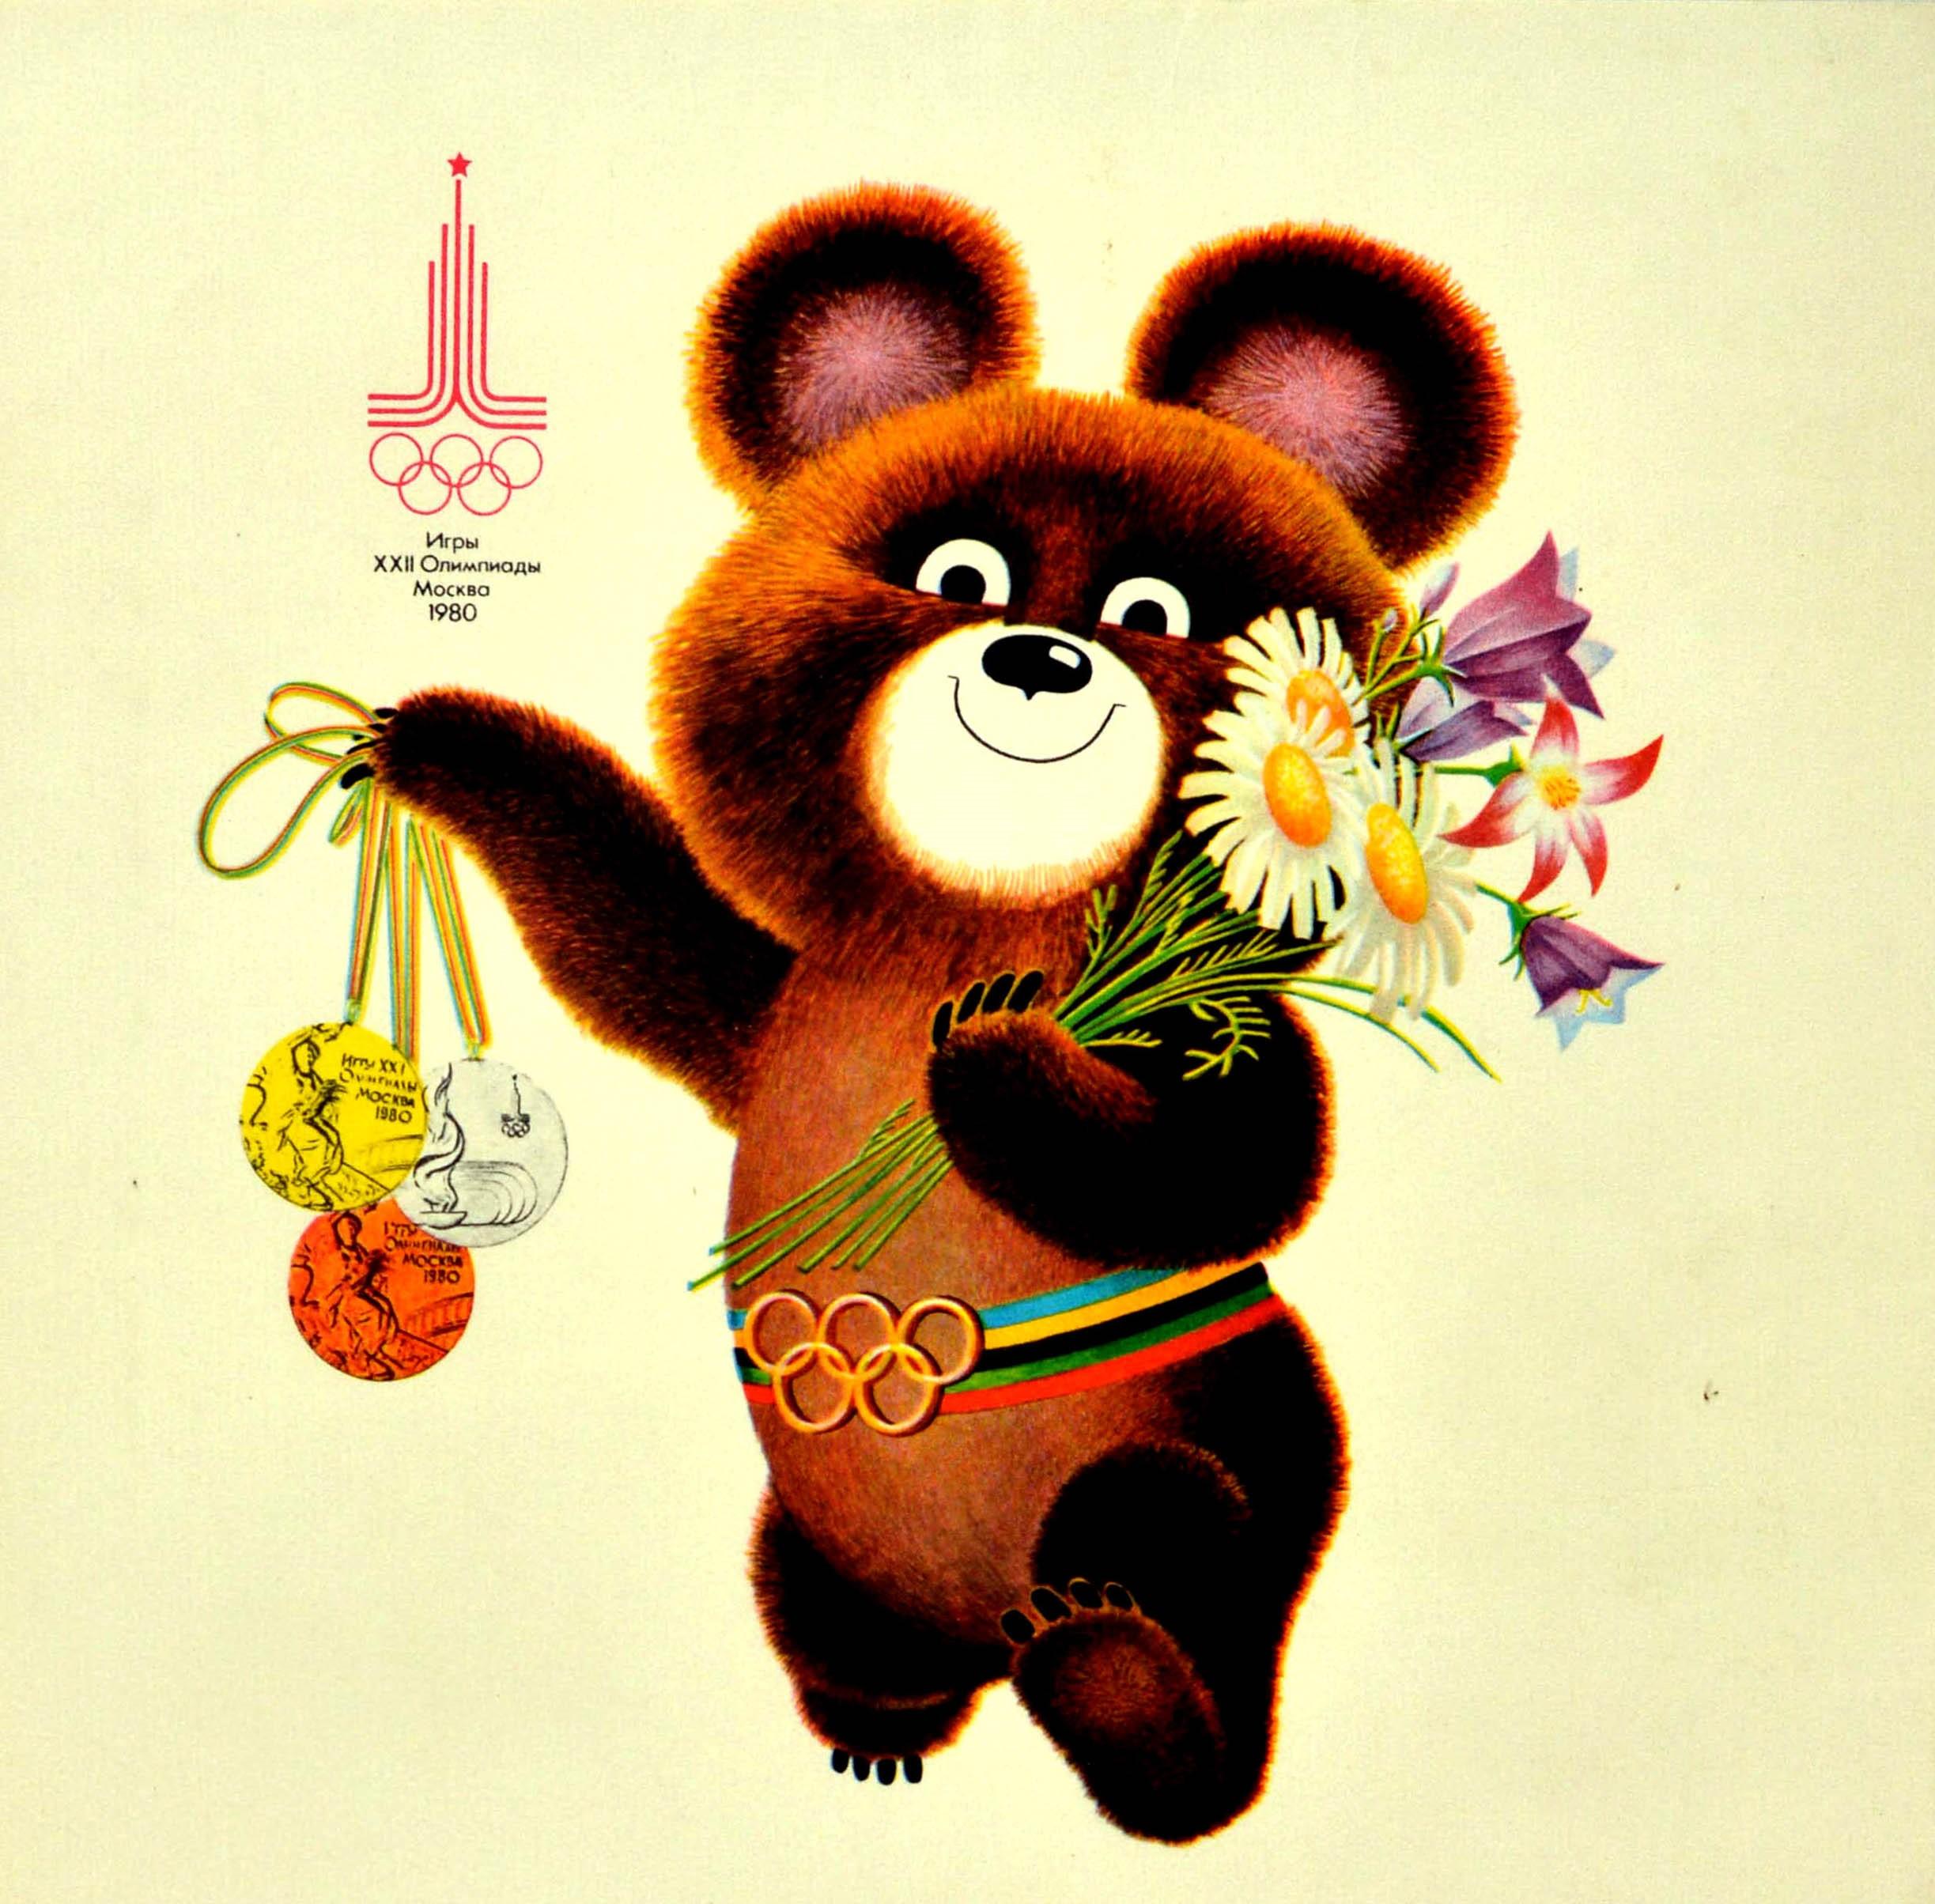 Original Vintage Poster Moscow Olympics 1980 Misha Bear Mascot Best Wishes Sport - Print by A. Archipenko